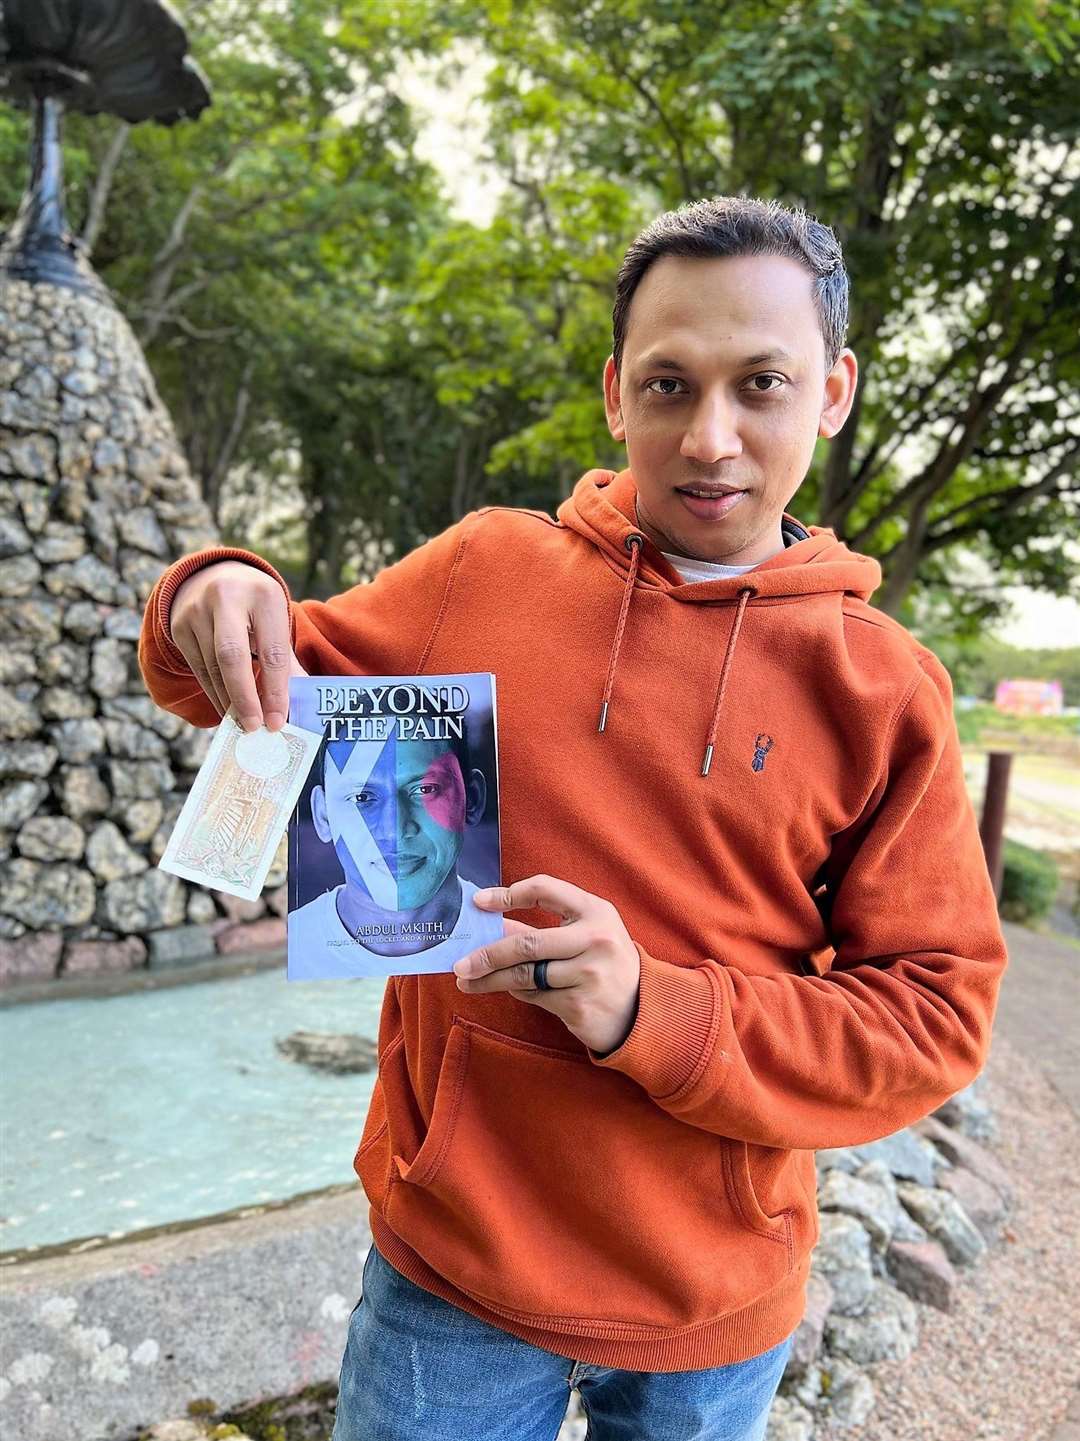 Abdul Mkith with his new book Beyond the Pain and holding a Bangladeshi five taka note. He will give out the notes for readers to use as bookmarks.